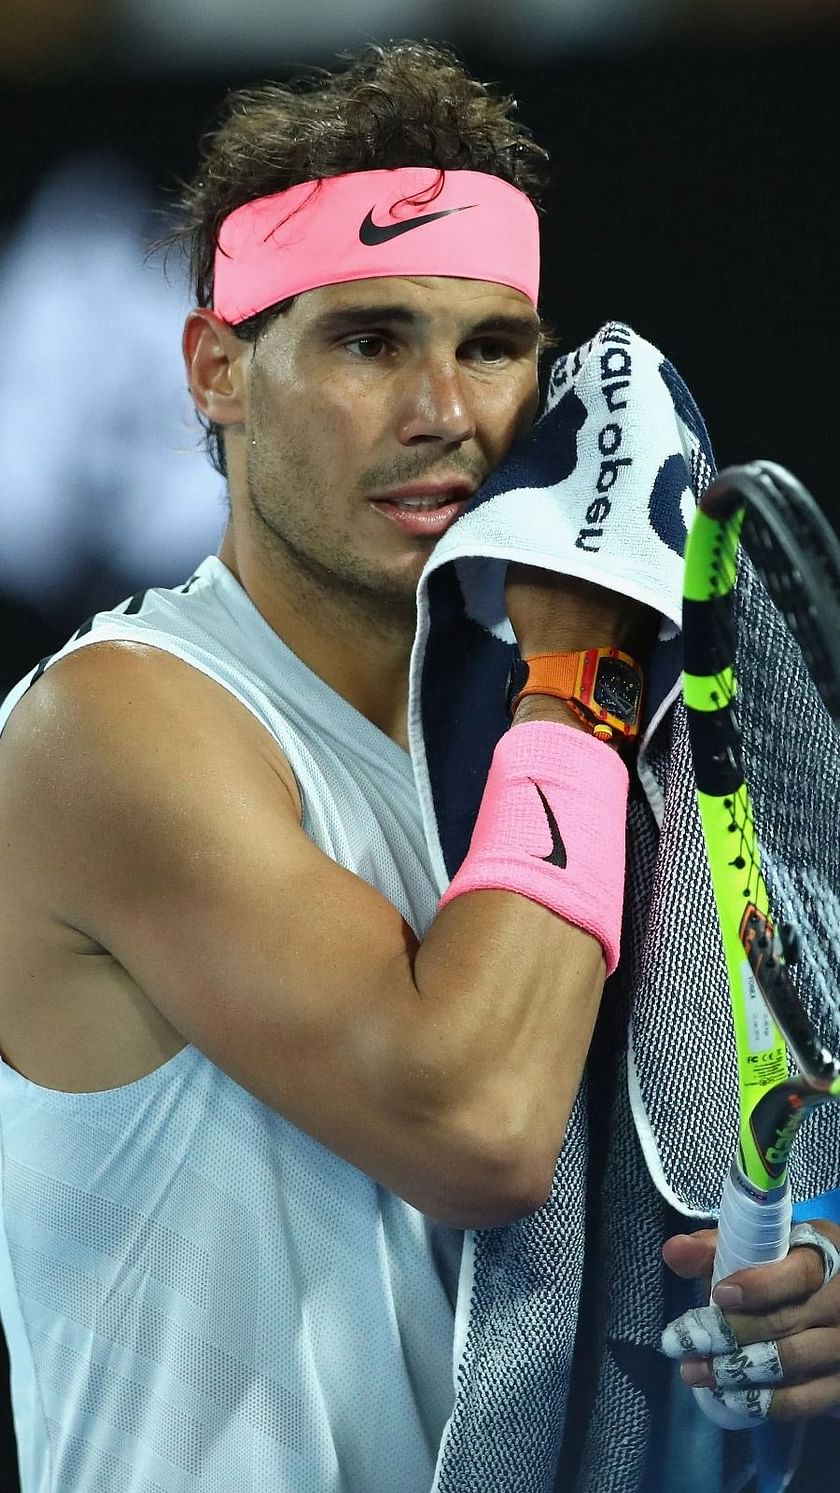 Rafael Nadal out of U.S. Open, ends season to heal injured foot